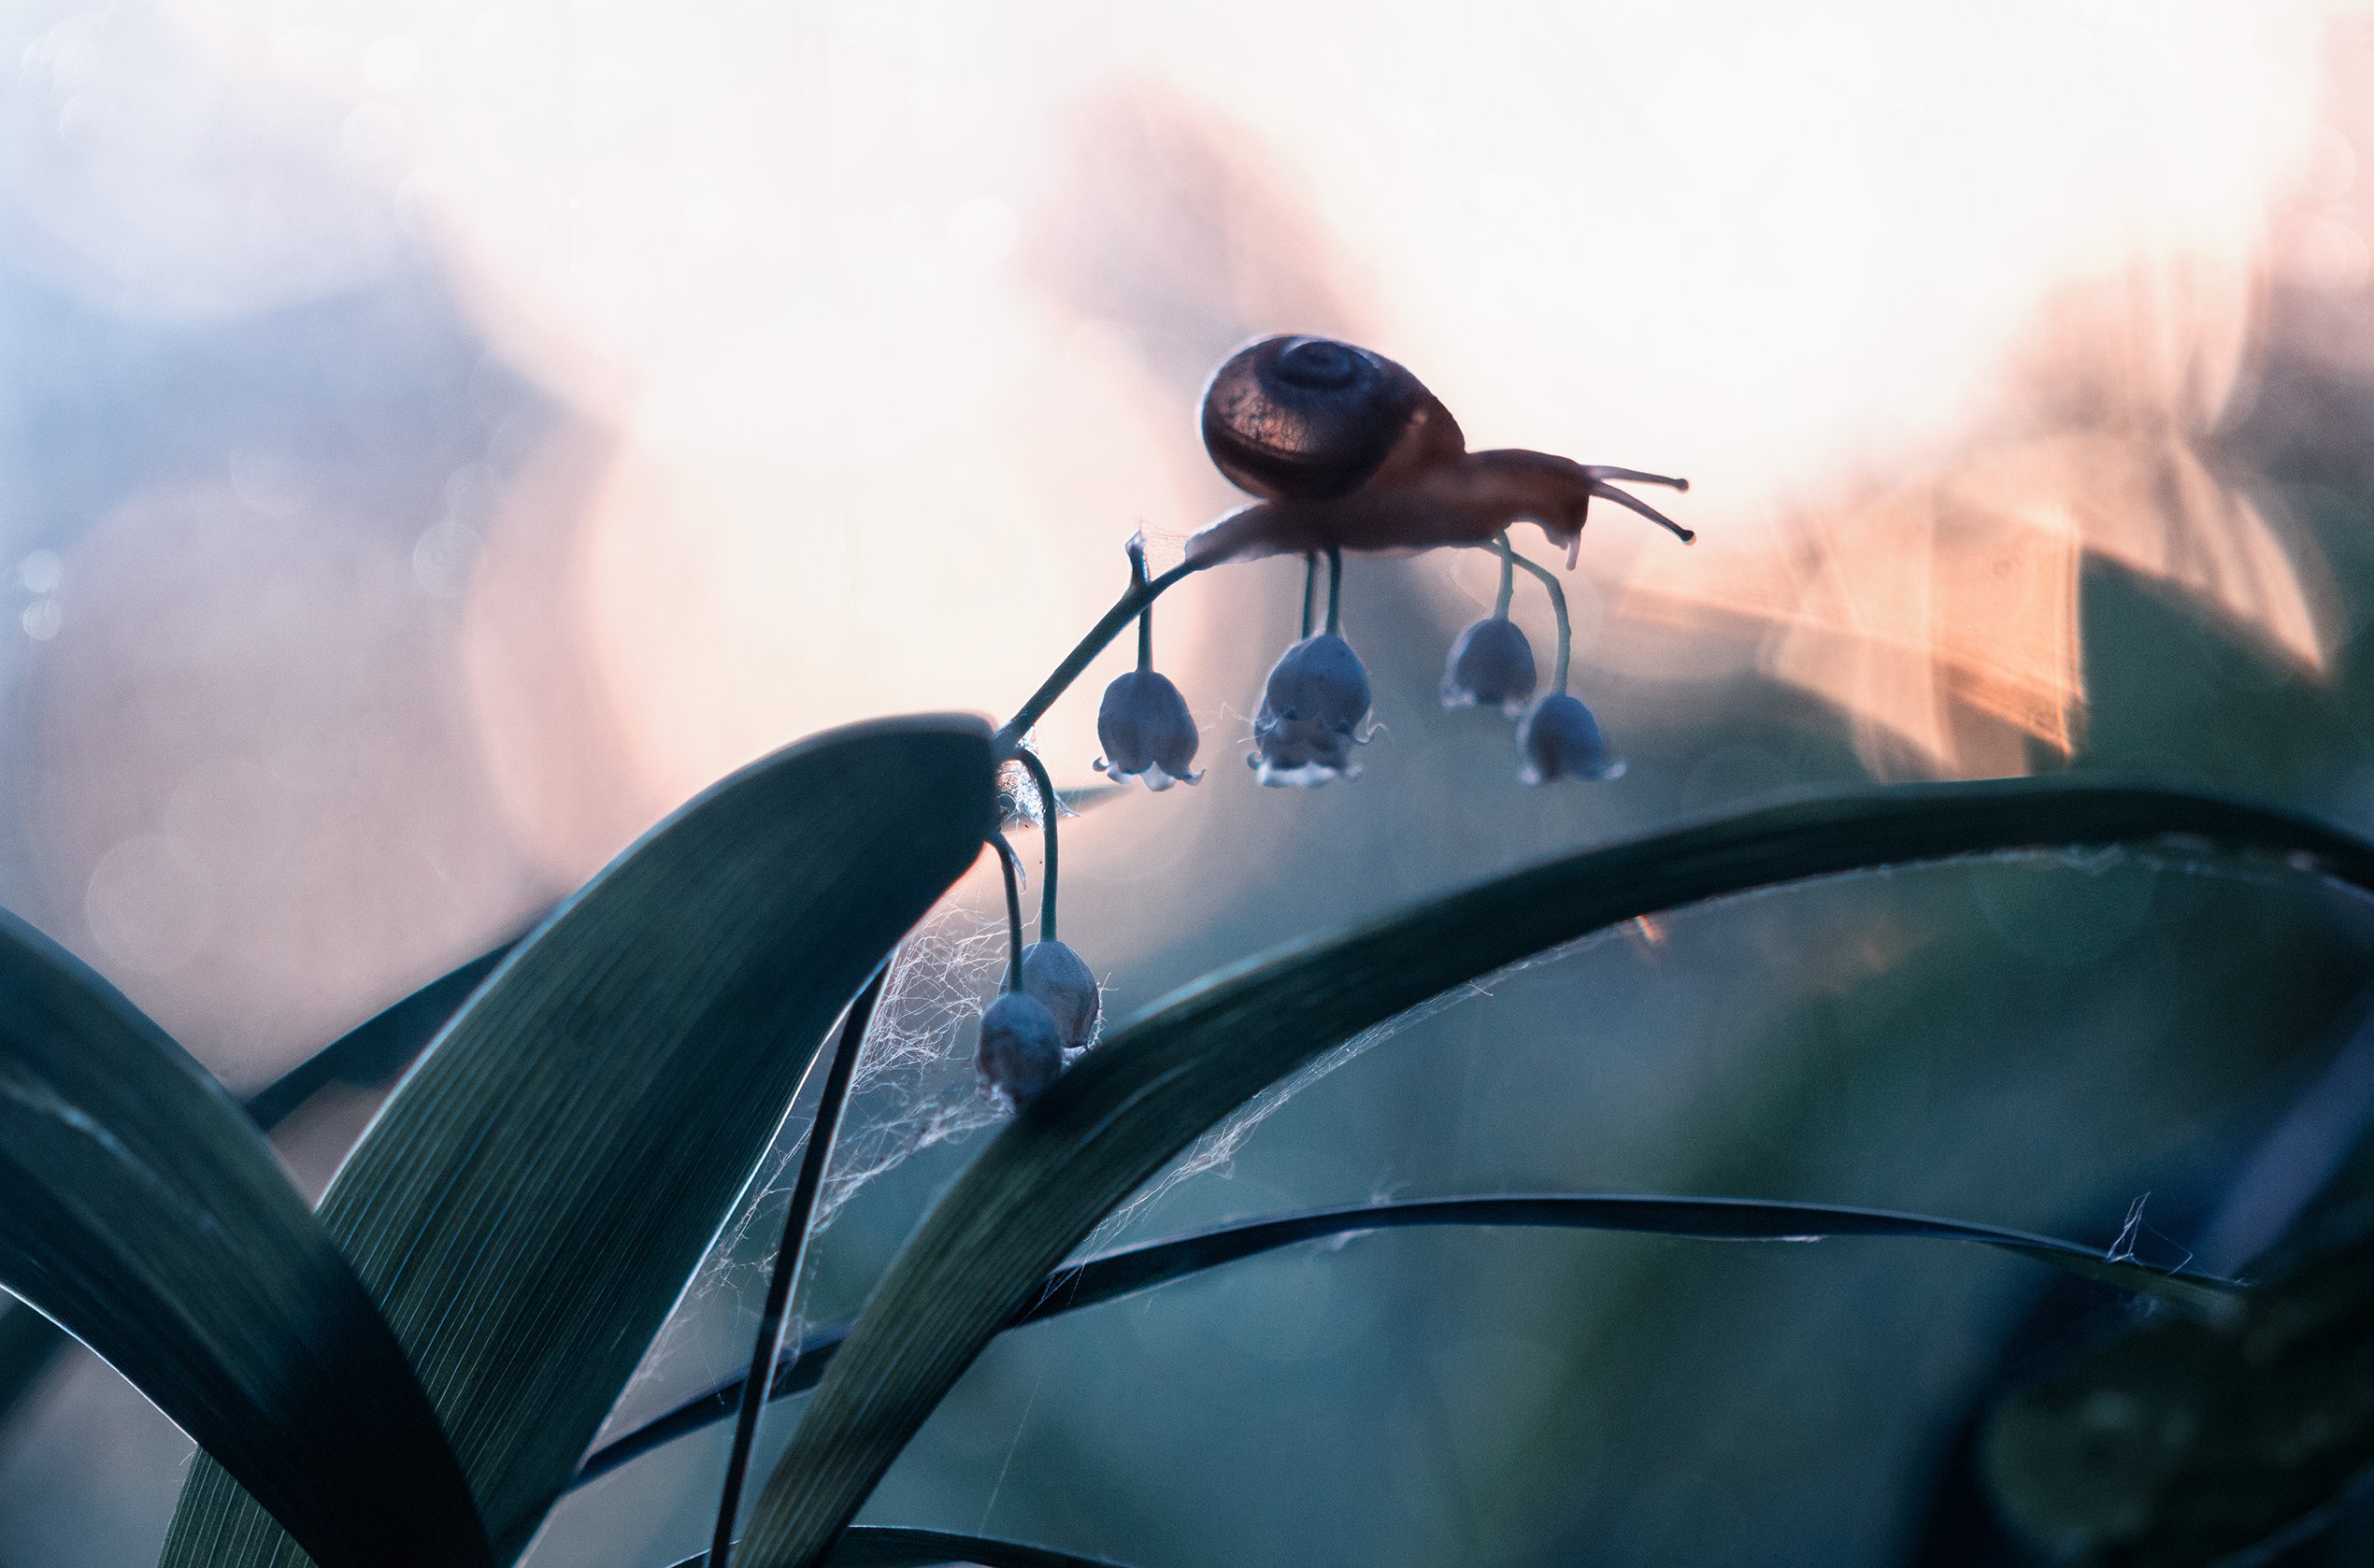 улитка, лес, закат, вечер, природа, ландыши, snail, nature, sunset, forest, lilies of the valley, Людмила Гудина